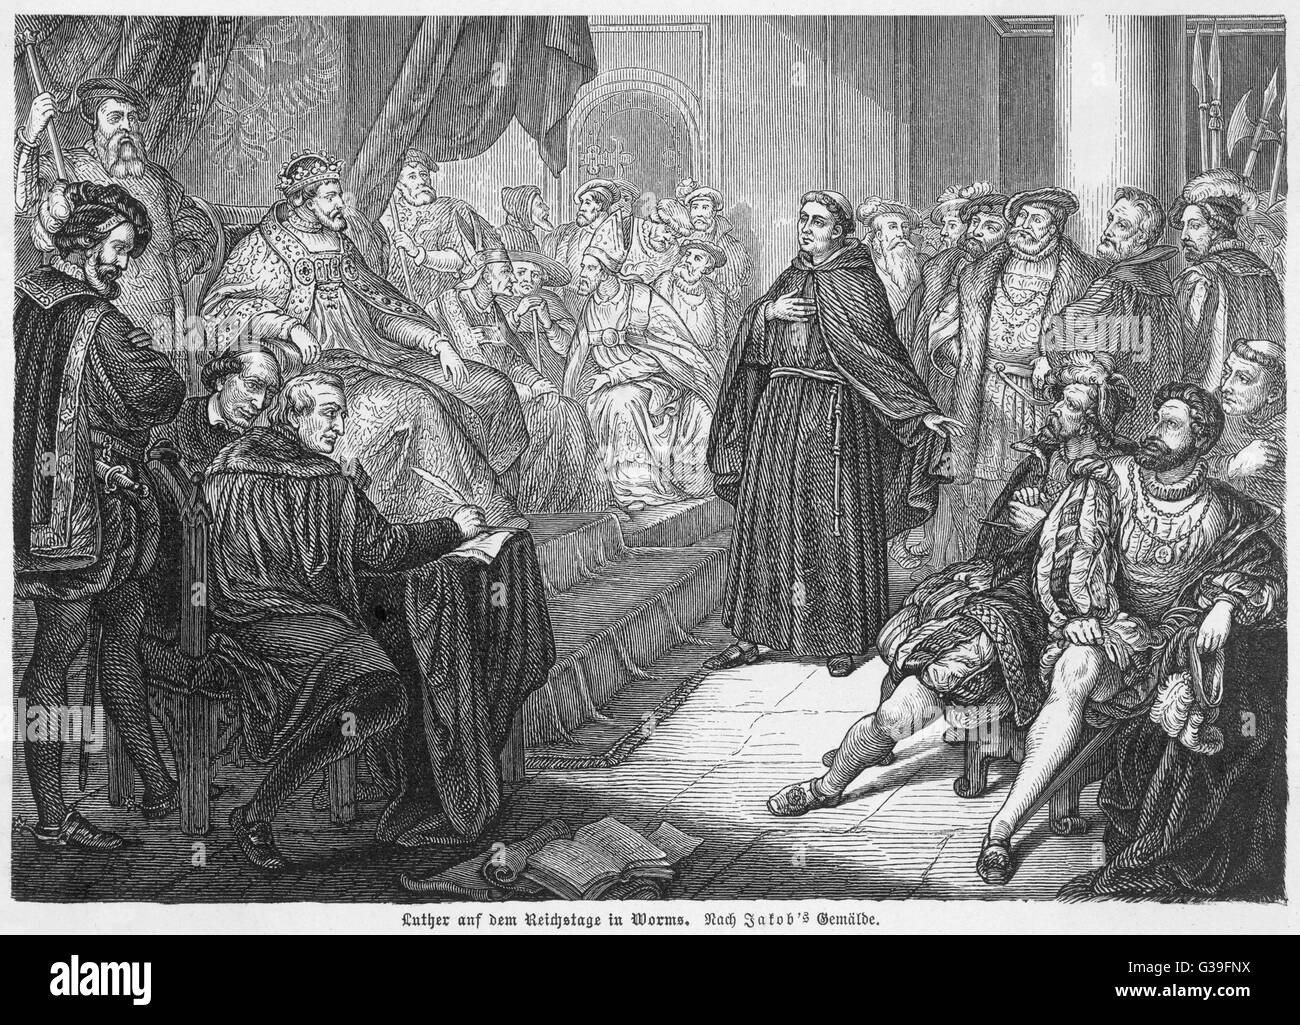 At the Diet of Worms, Luther defends his opinions before  the emperor and an assembly of notables from church and  state ; proscribed, he goes into protective hiding     Date: 17 April 1521 Stock Photo